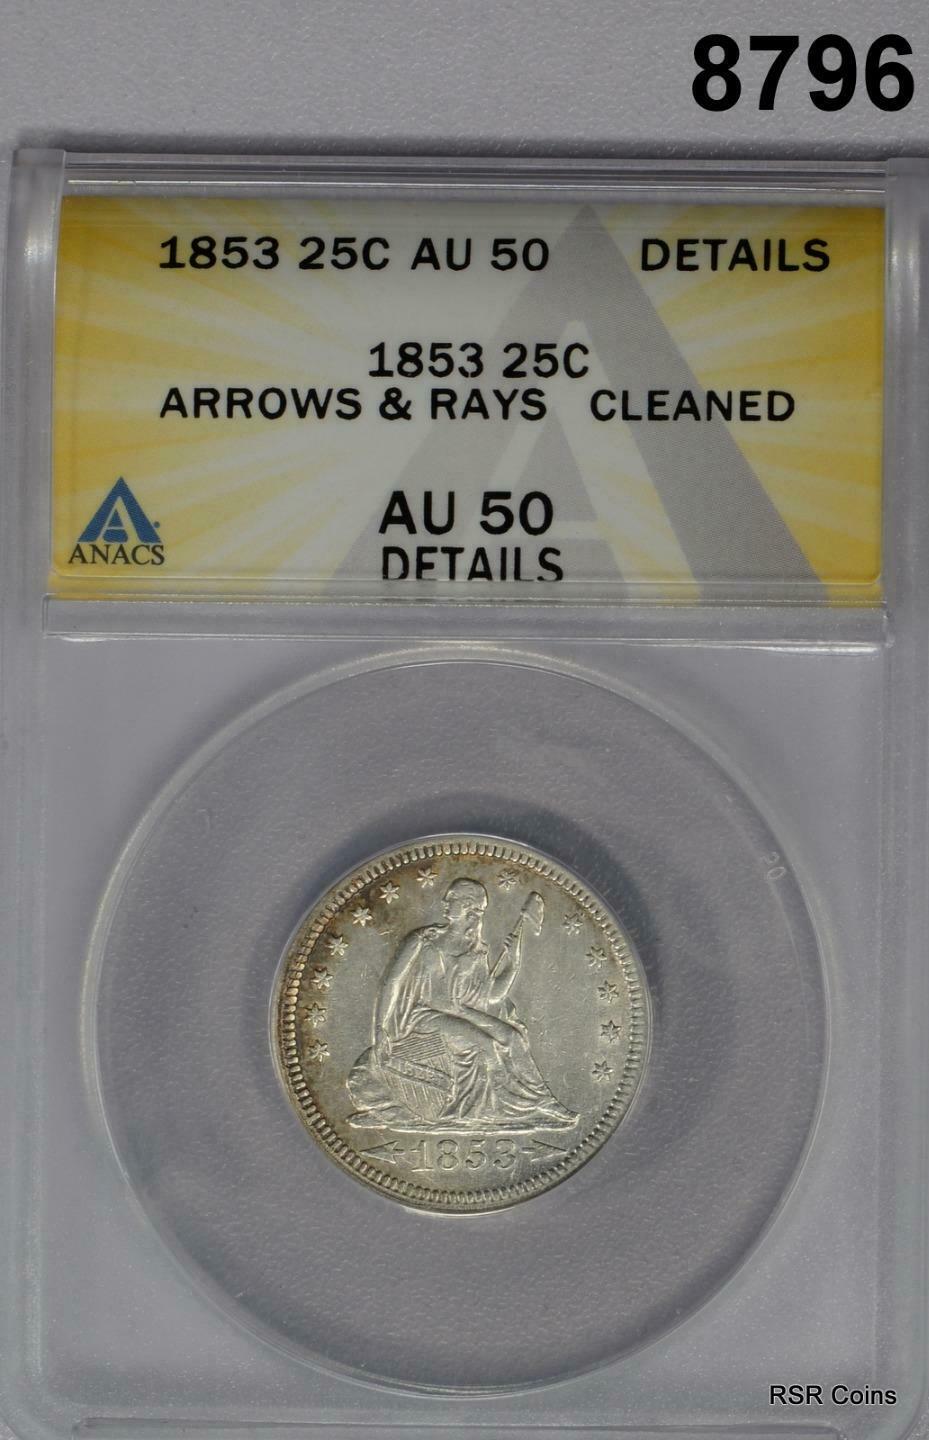 1853 SEATED QUARTER ARROWS & RAYS ANACS CERTIFIED AU50 CLEANED LOOK BETTER!#8796